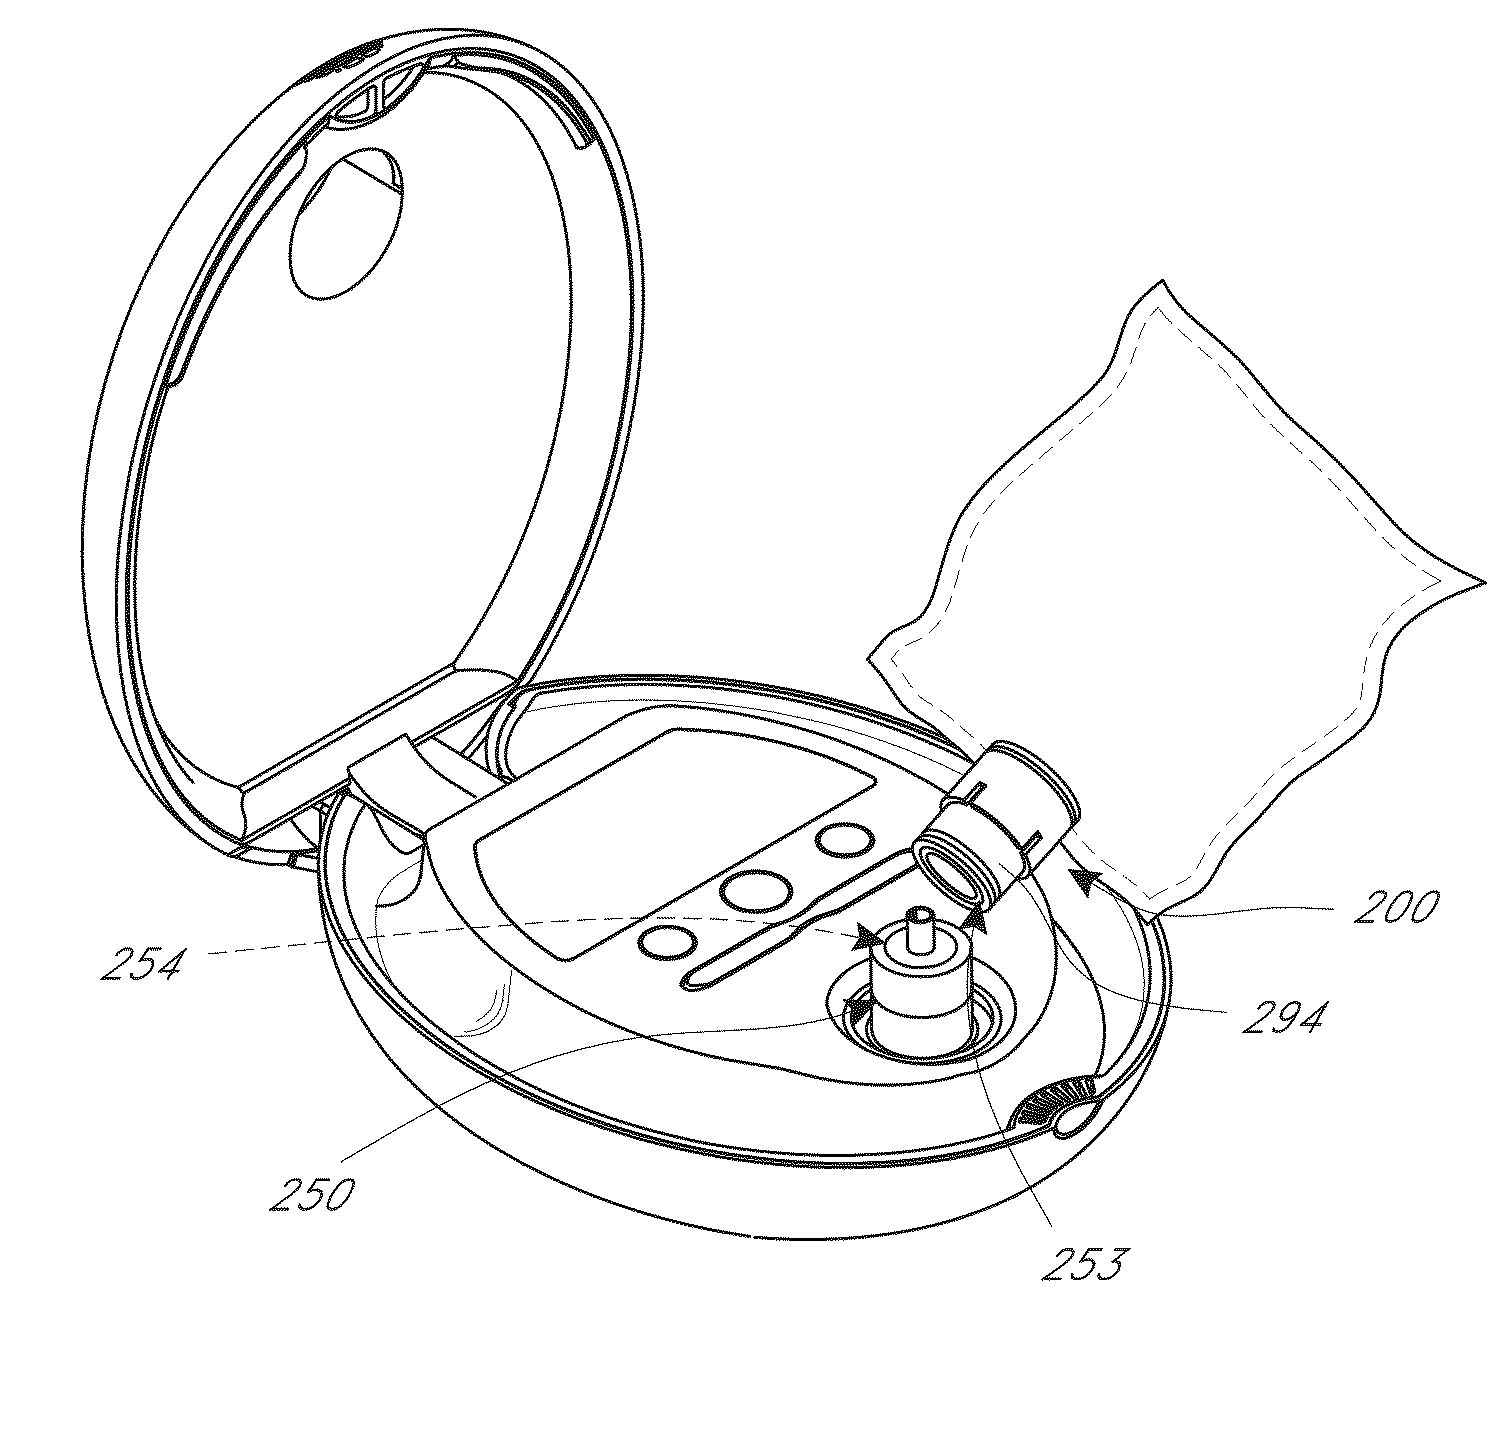 Transversely-activated valve for a therapeutic vaporizer bag attachment system